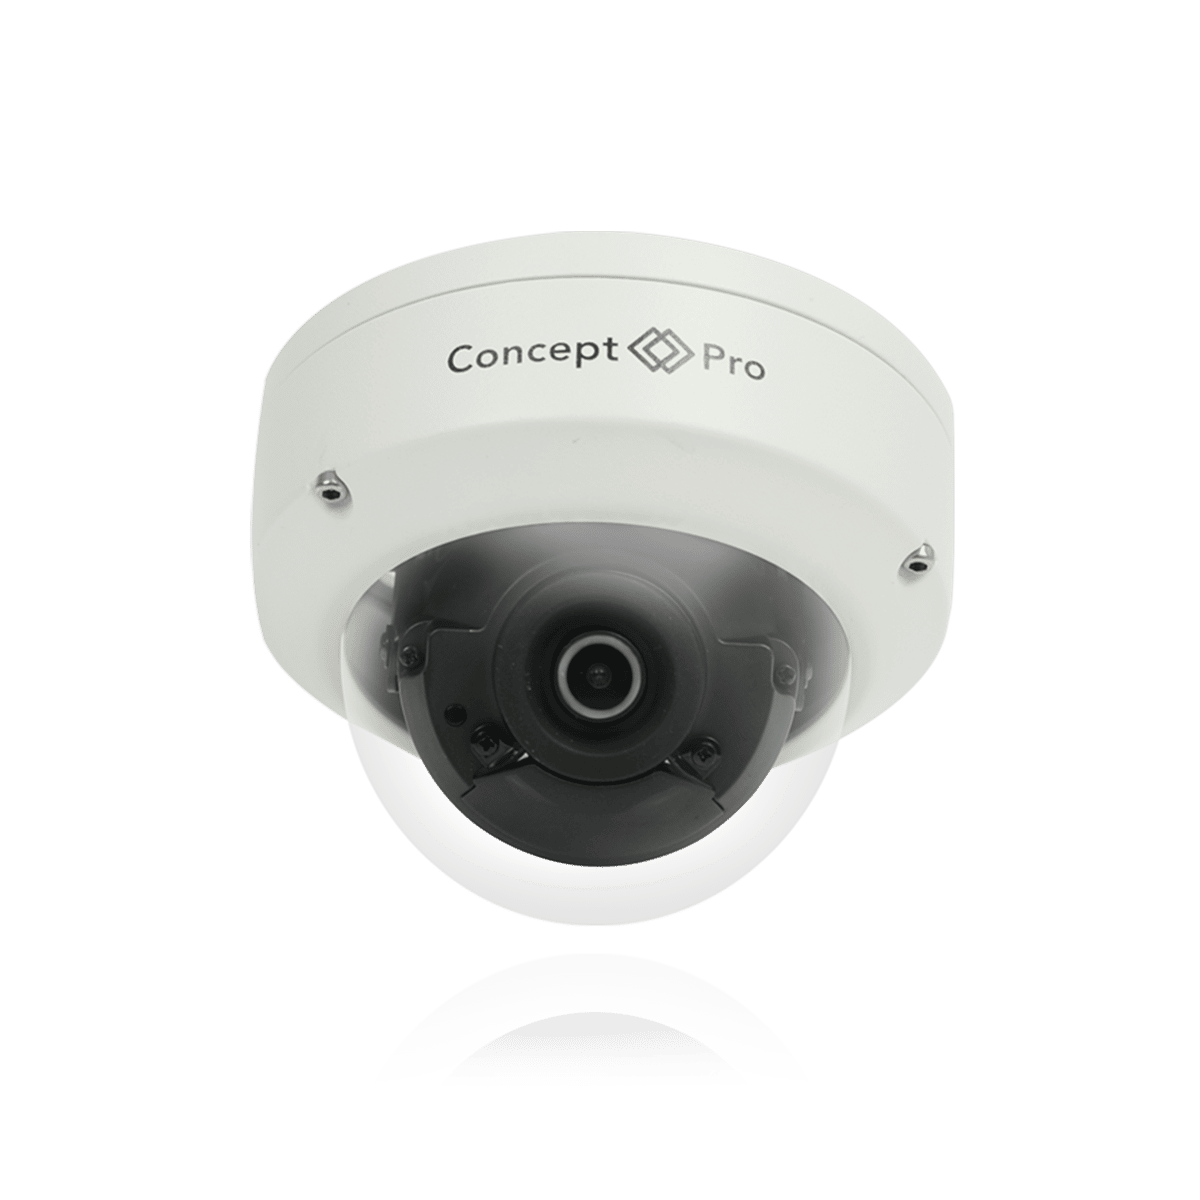 White 8MP IP 2.8mm Fixed Lens Compact Dome camera that can be used in a retail environment.